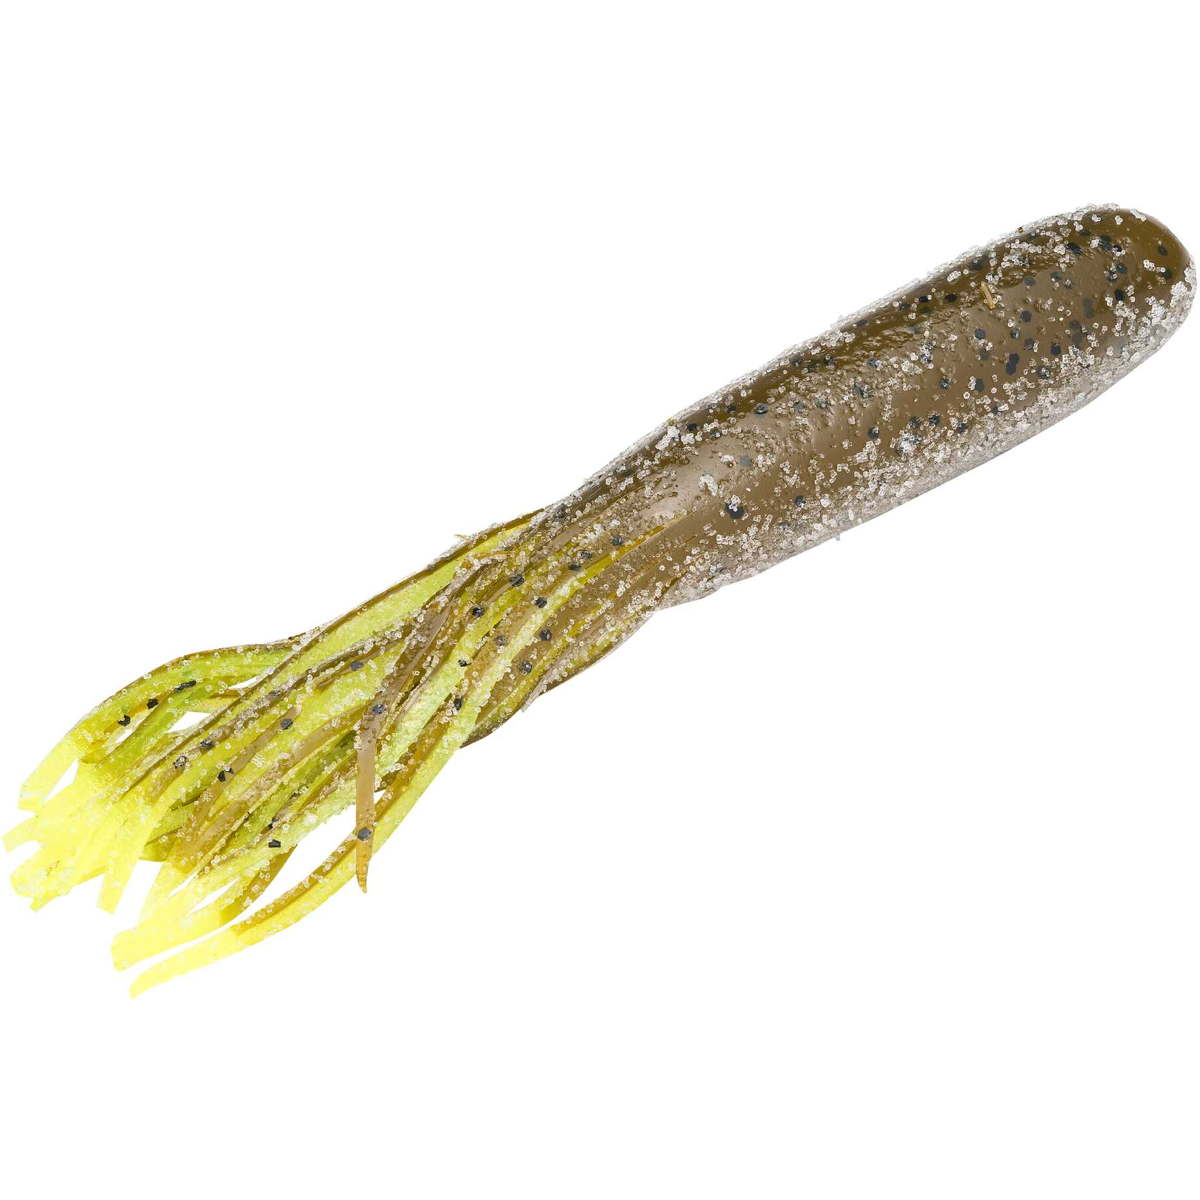 Photo of Strike King Coffee Flip-N-Tube 4.5" Soft Bait for sale at United Tackle Shops.